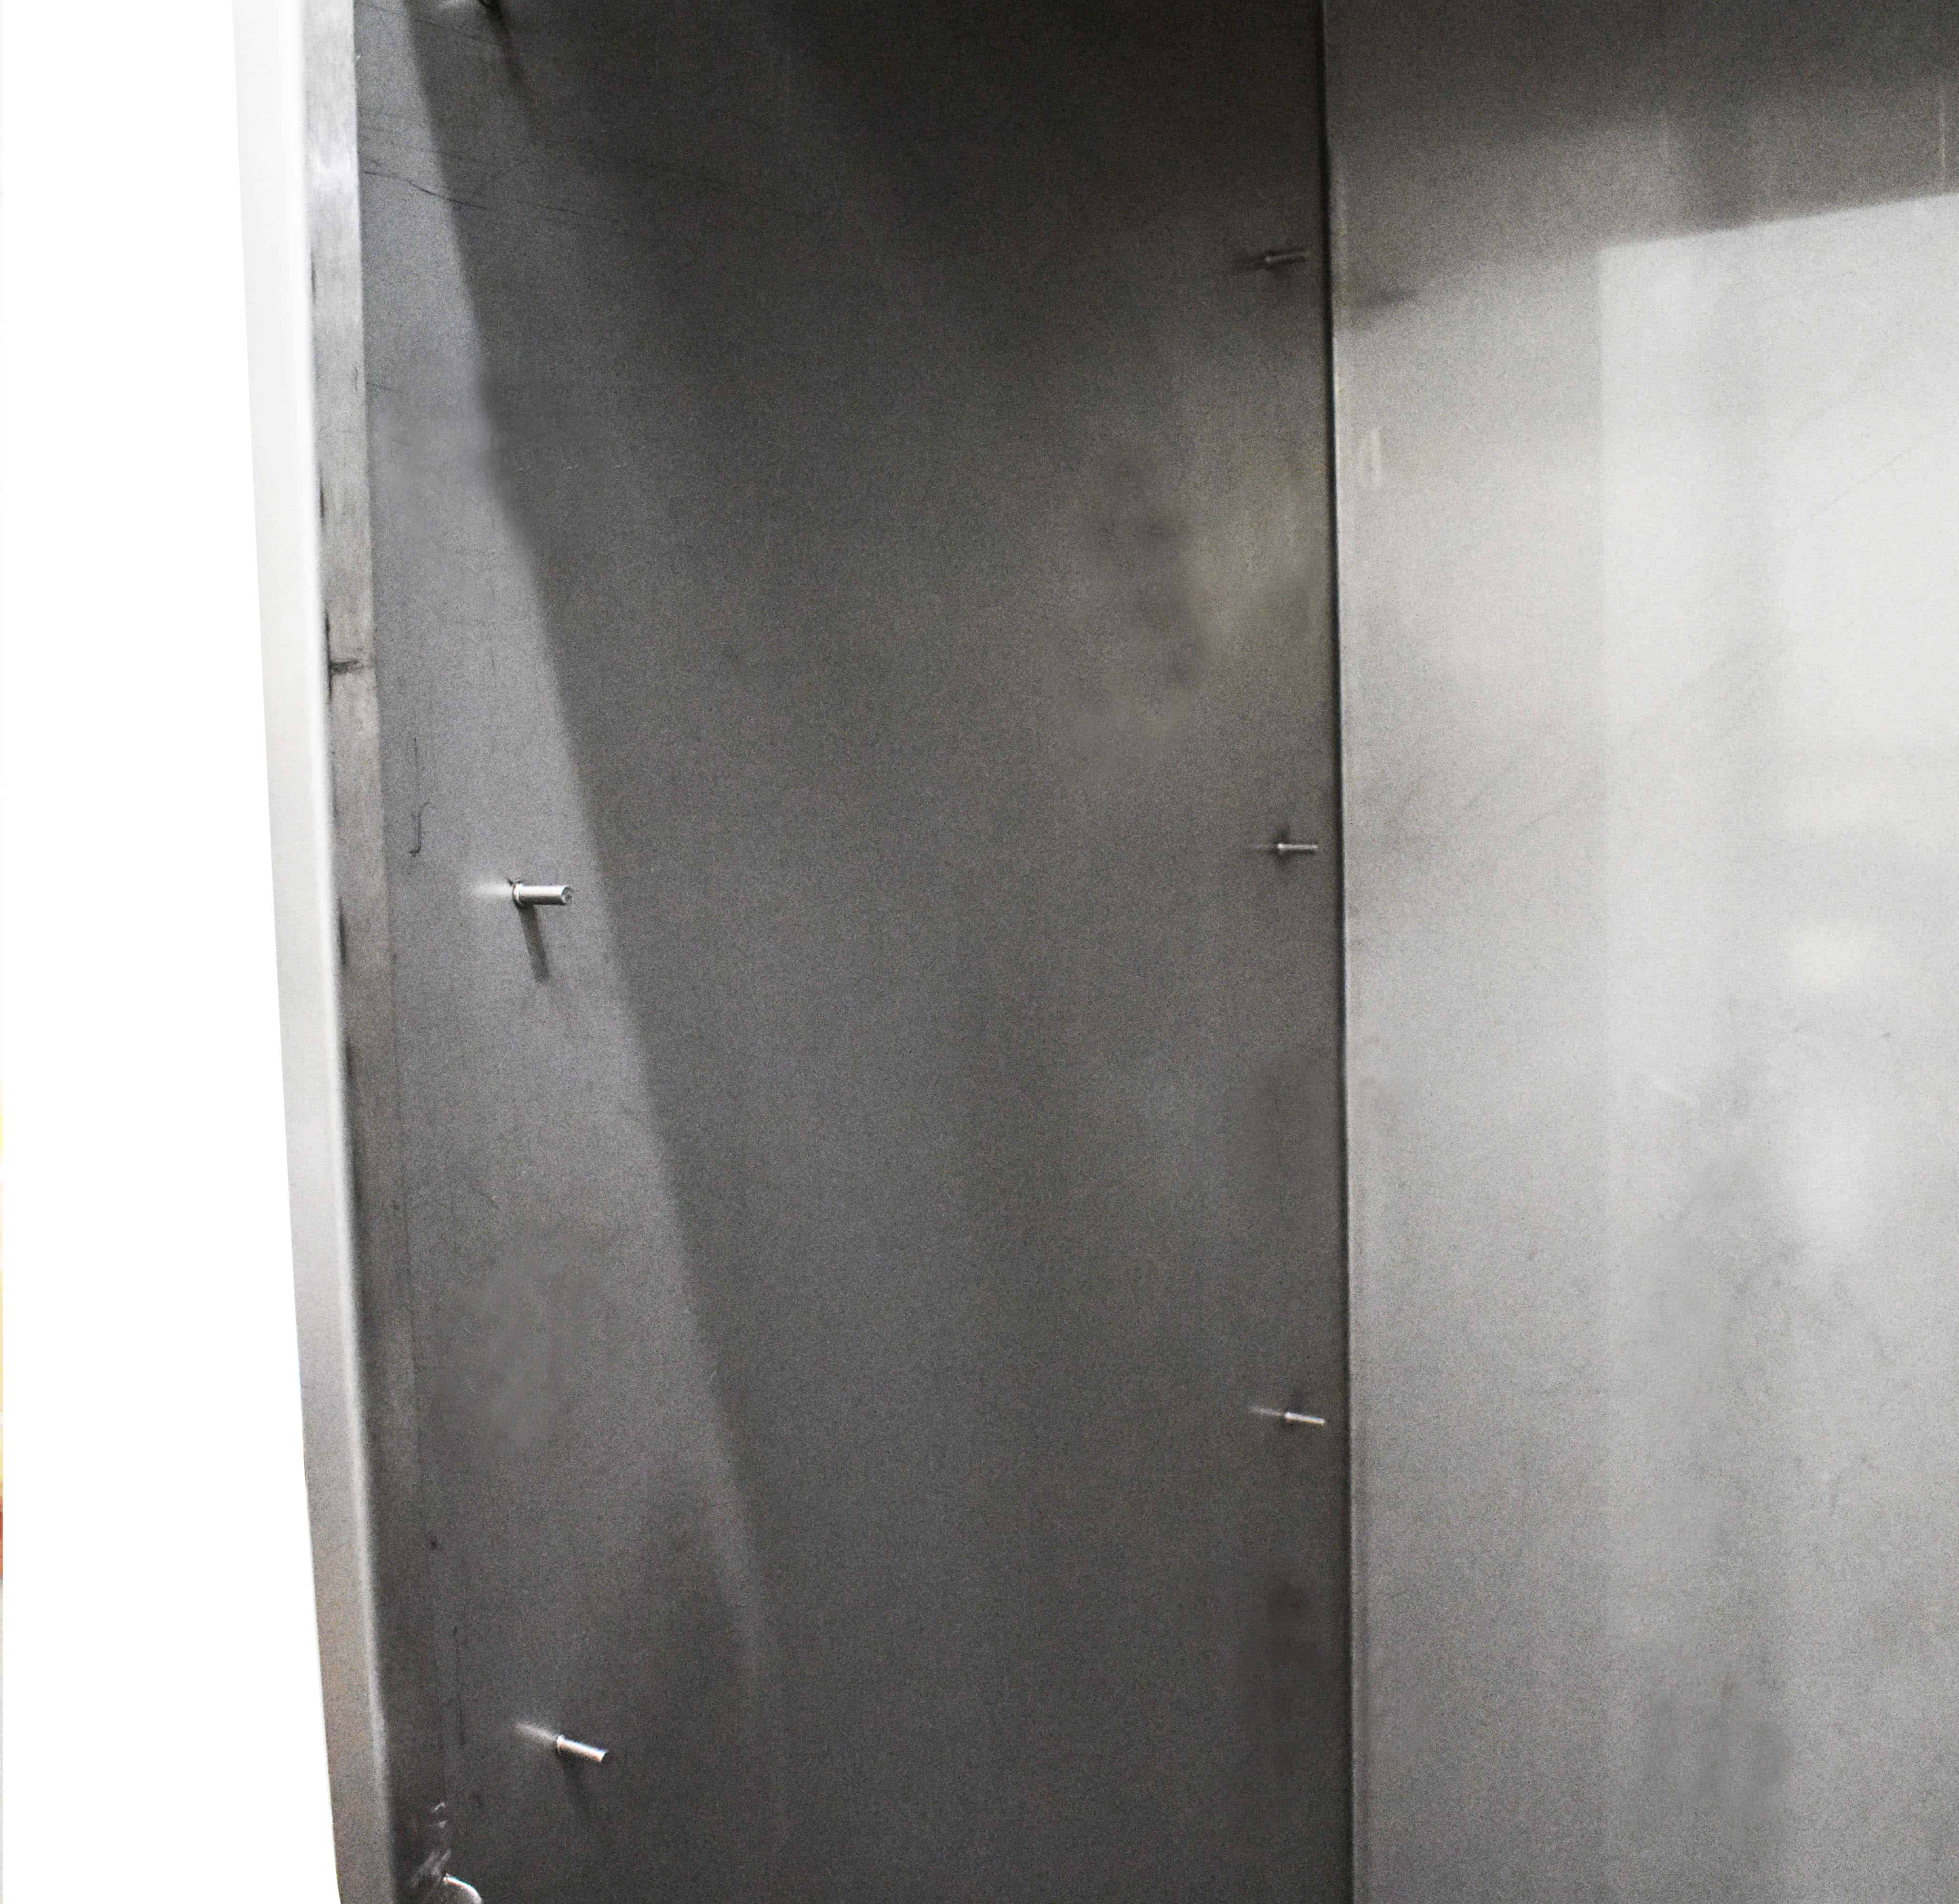 Stainless steel cupboard with garment rail